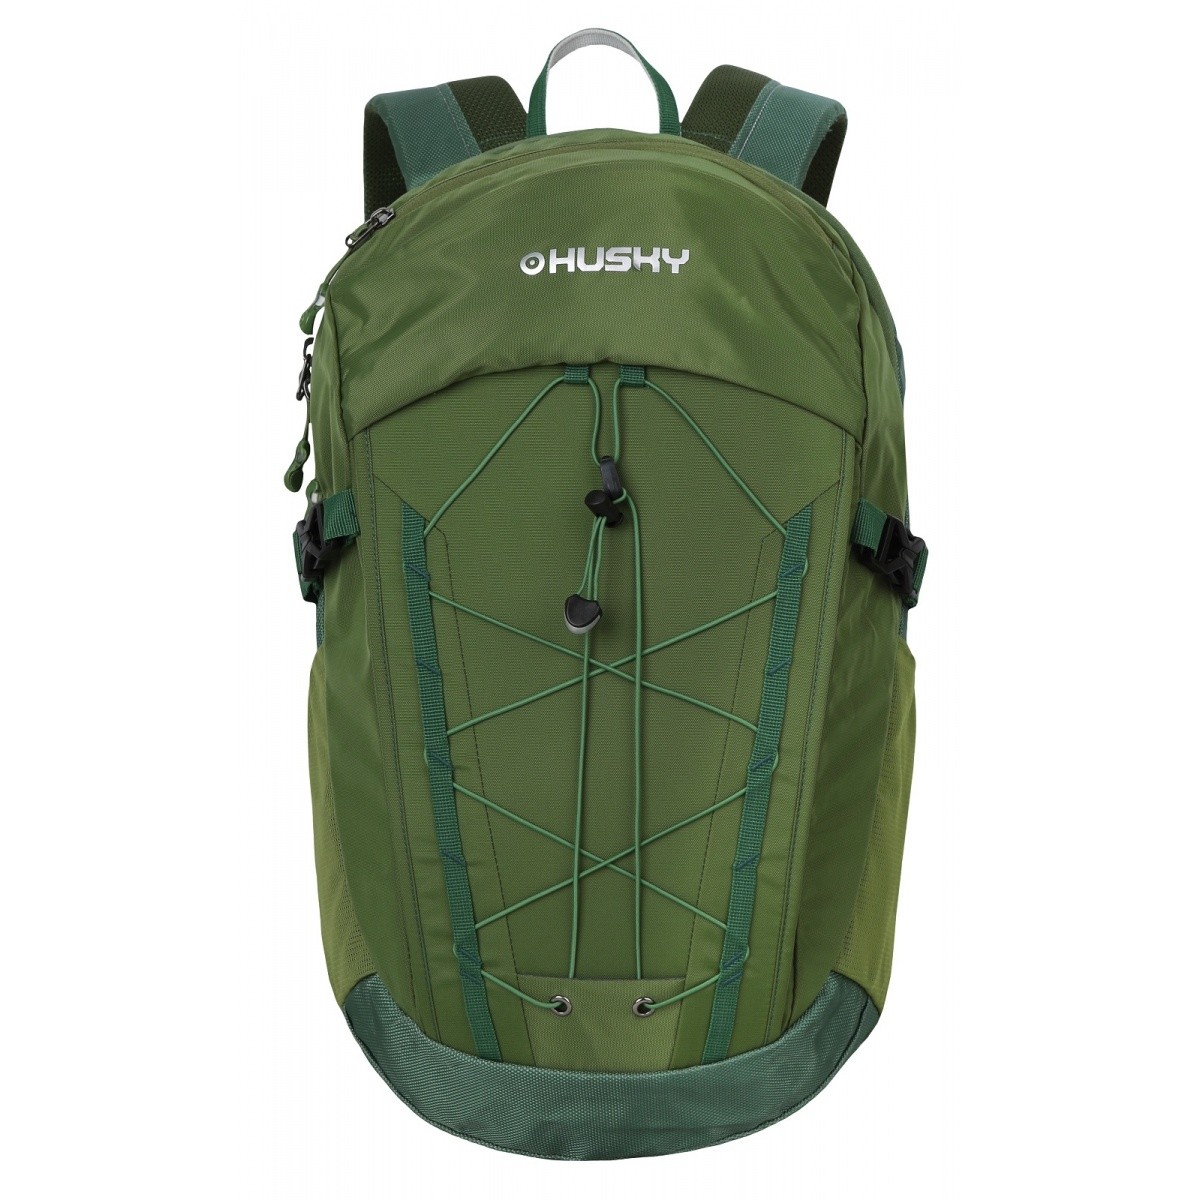 Backpack Nory 22 green HUSKY - view 1